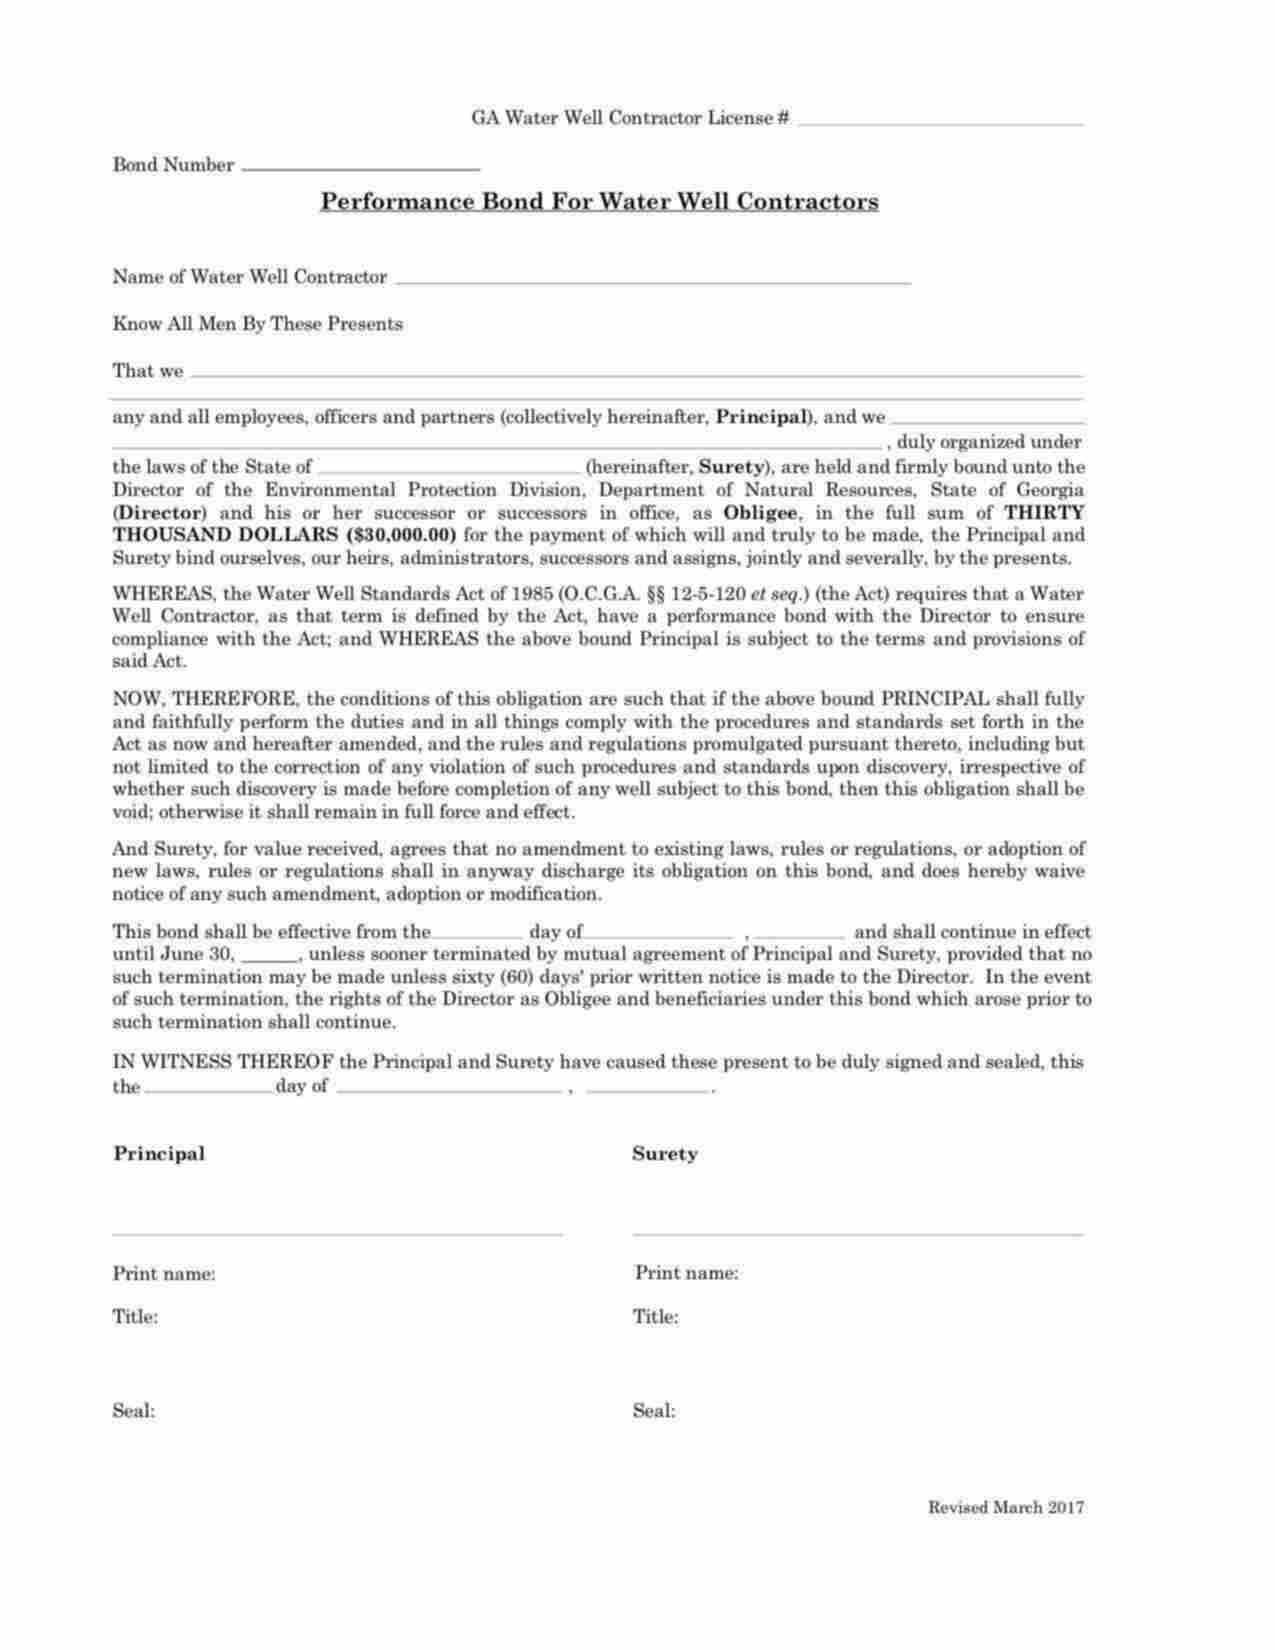 Georgia Water Well Contractors Performance Bond Form